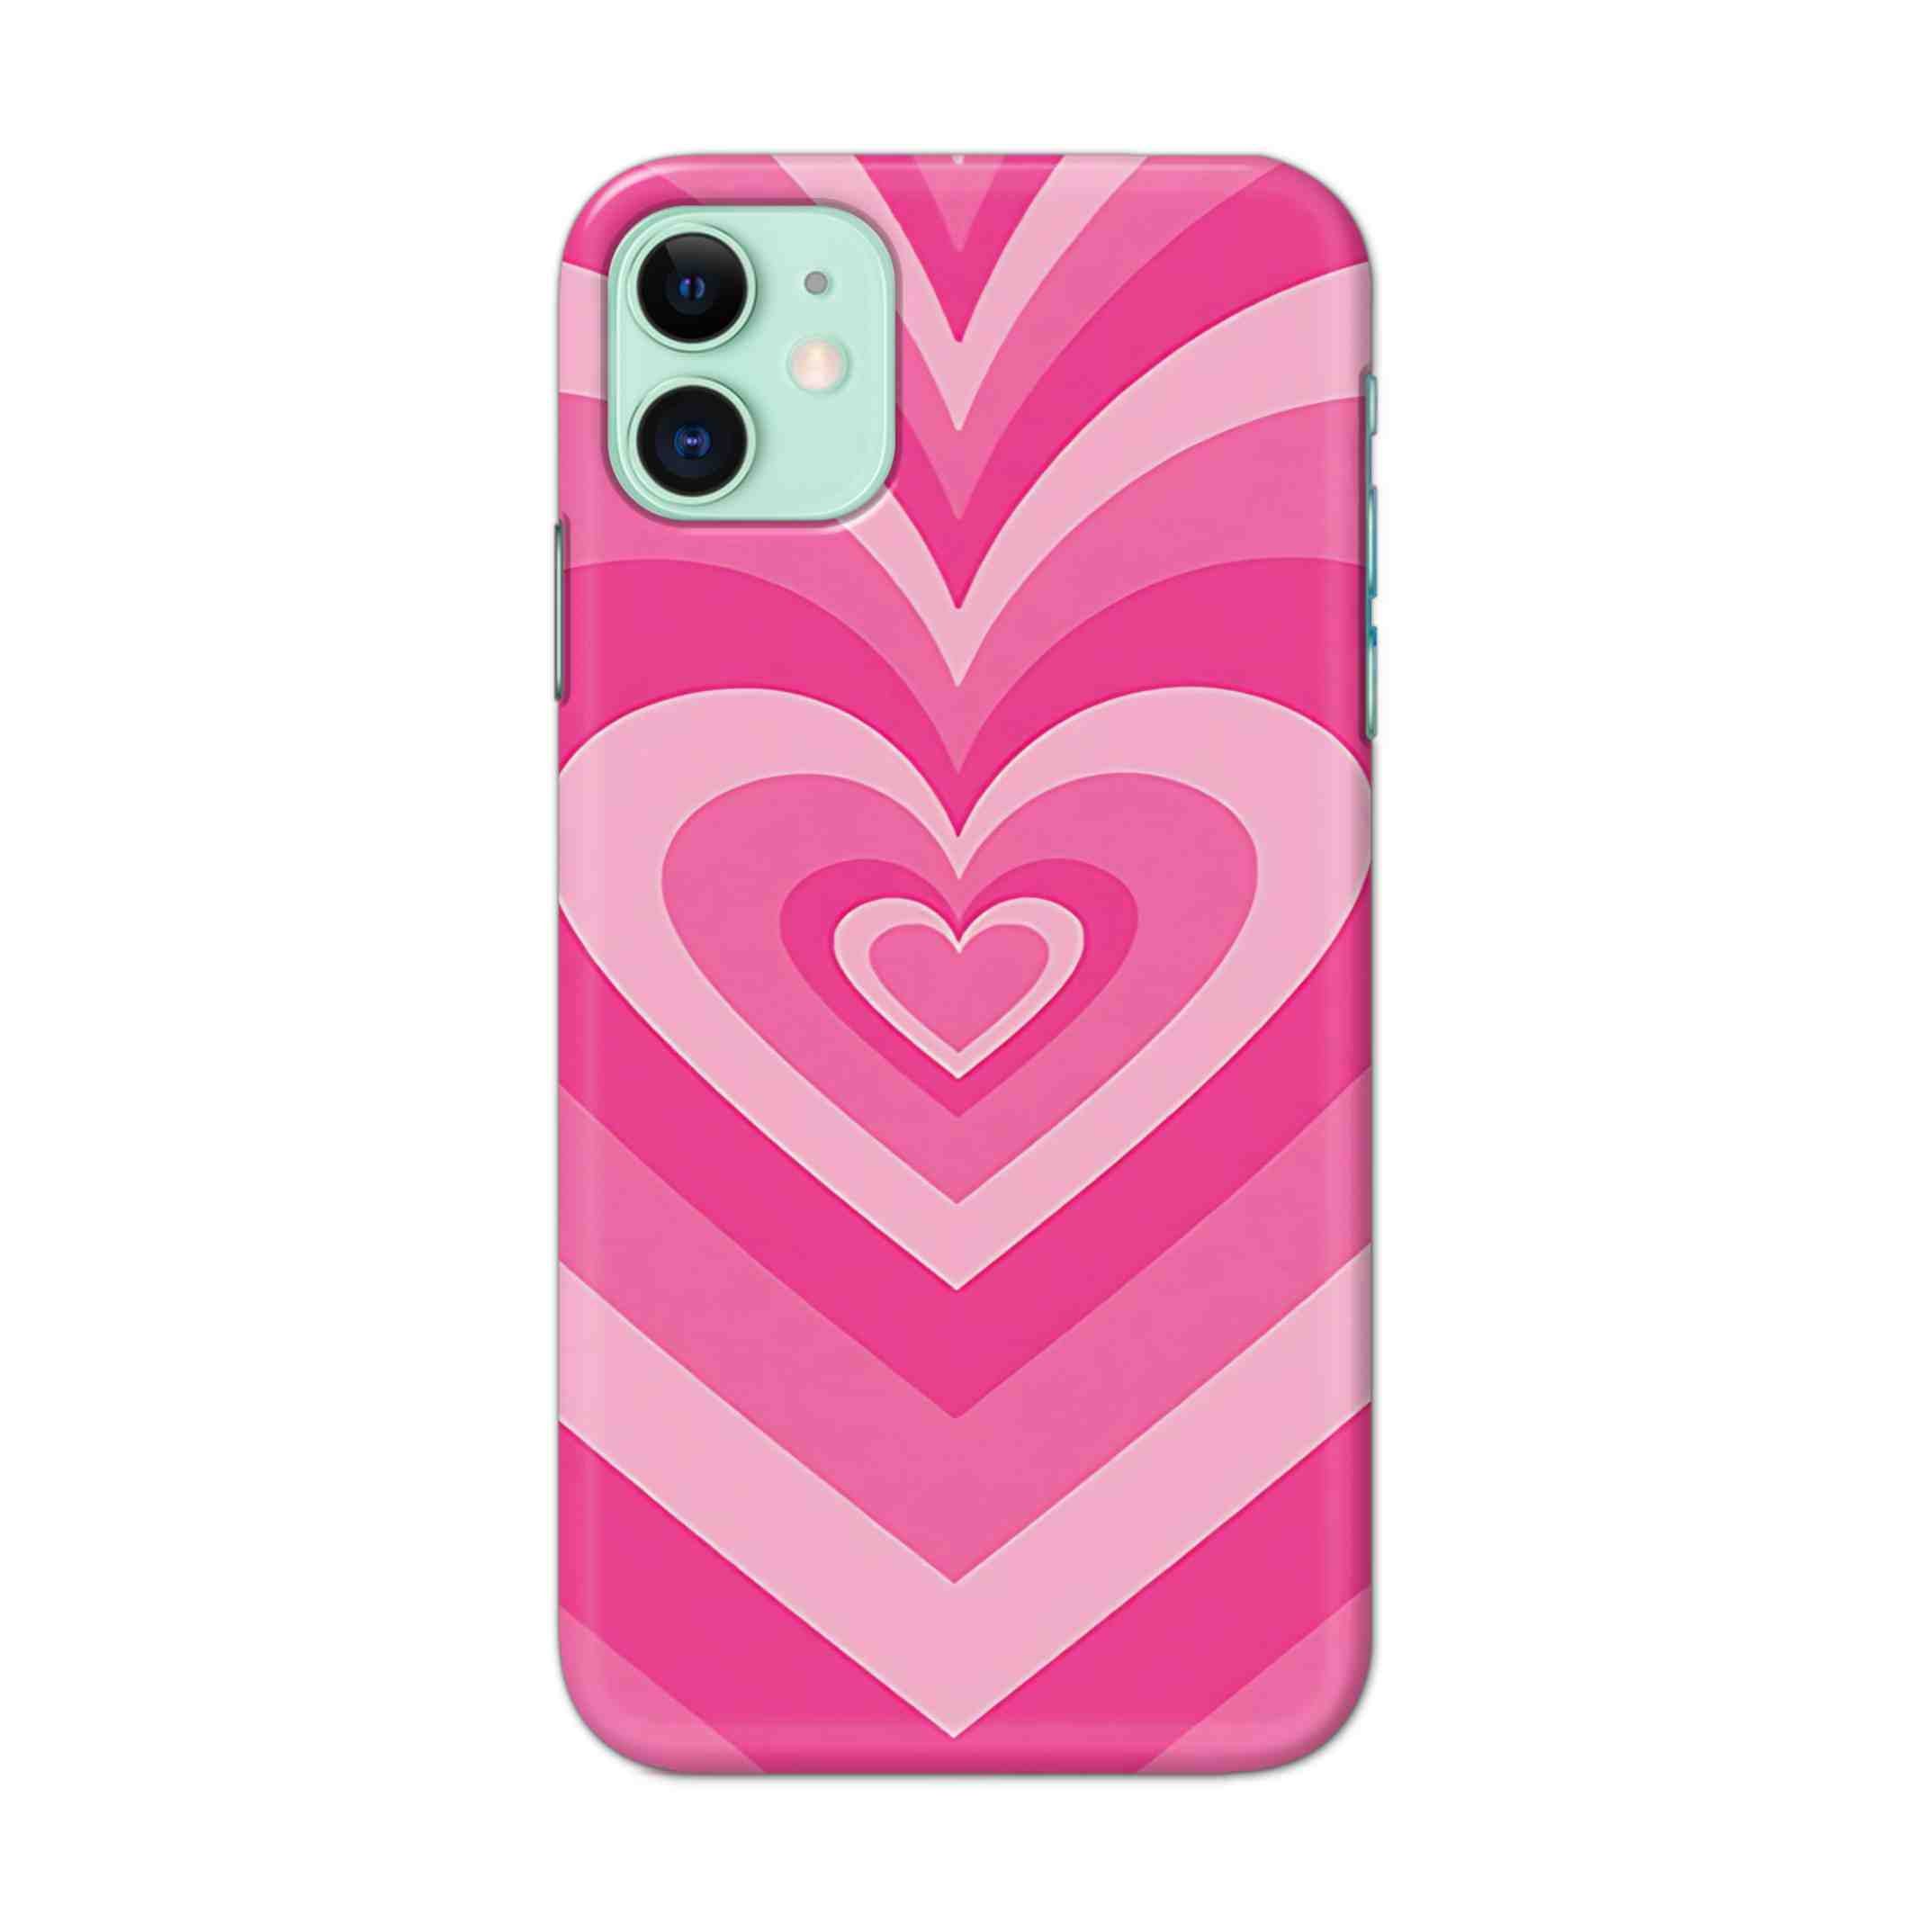 Buy Pink Heart Hard Back Mobile Phone Case Cover For iPhone 11 Online